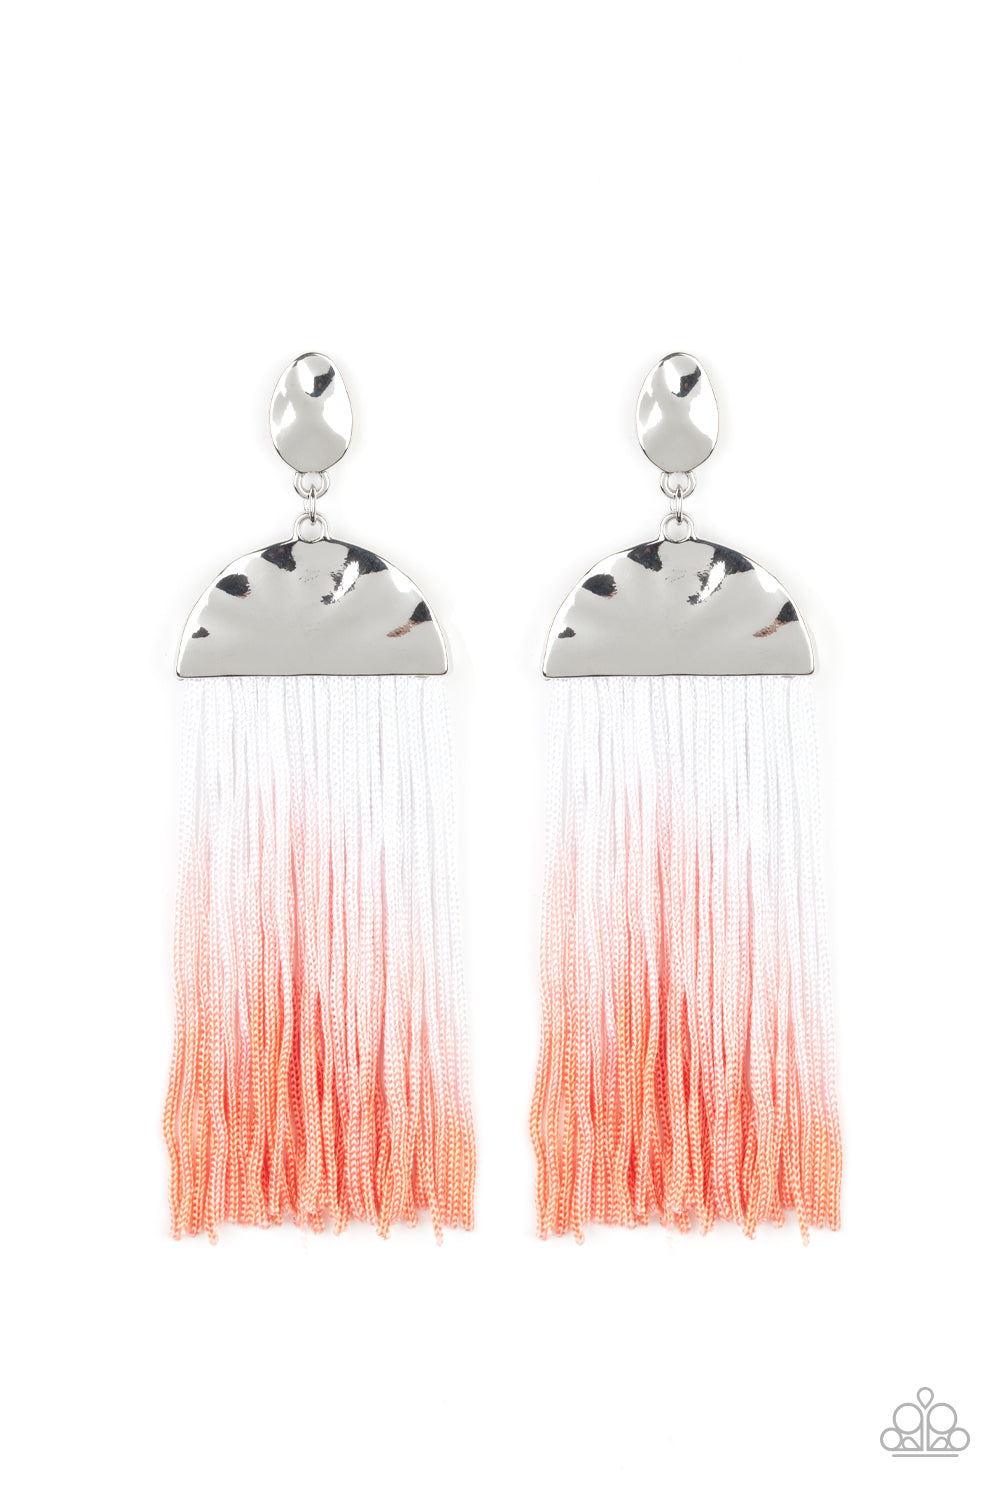 Rope Them In - Orange & White Ombre Earrings - Princess Glam Shop